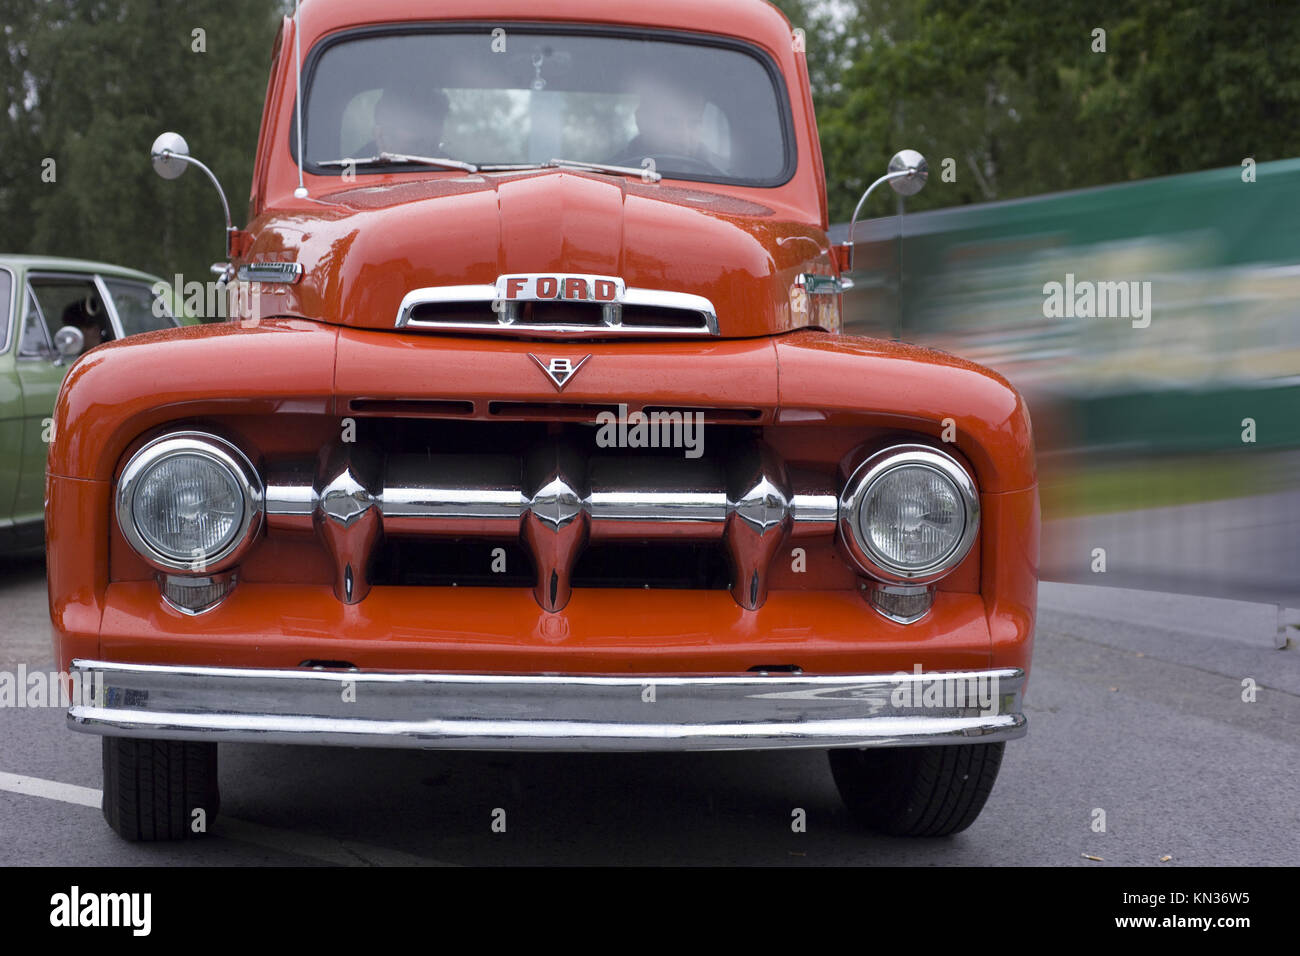 Ford Pick Up High Resolution Stock Photography and Images - Alamy